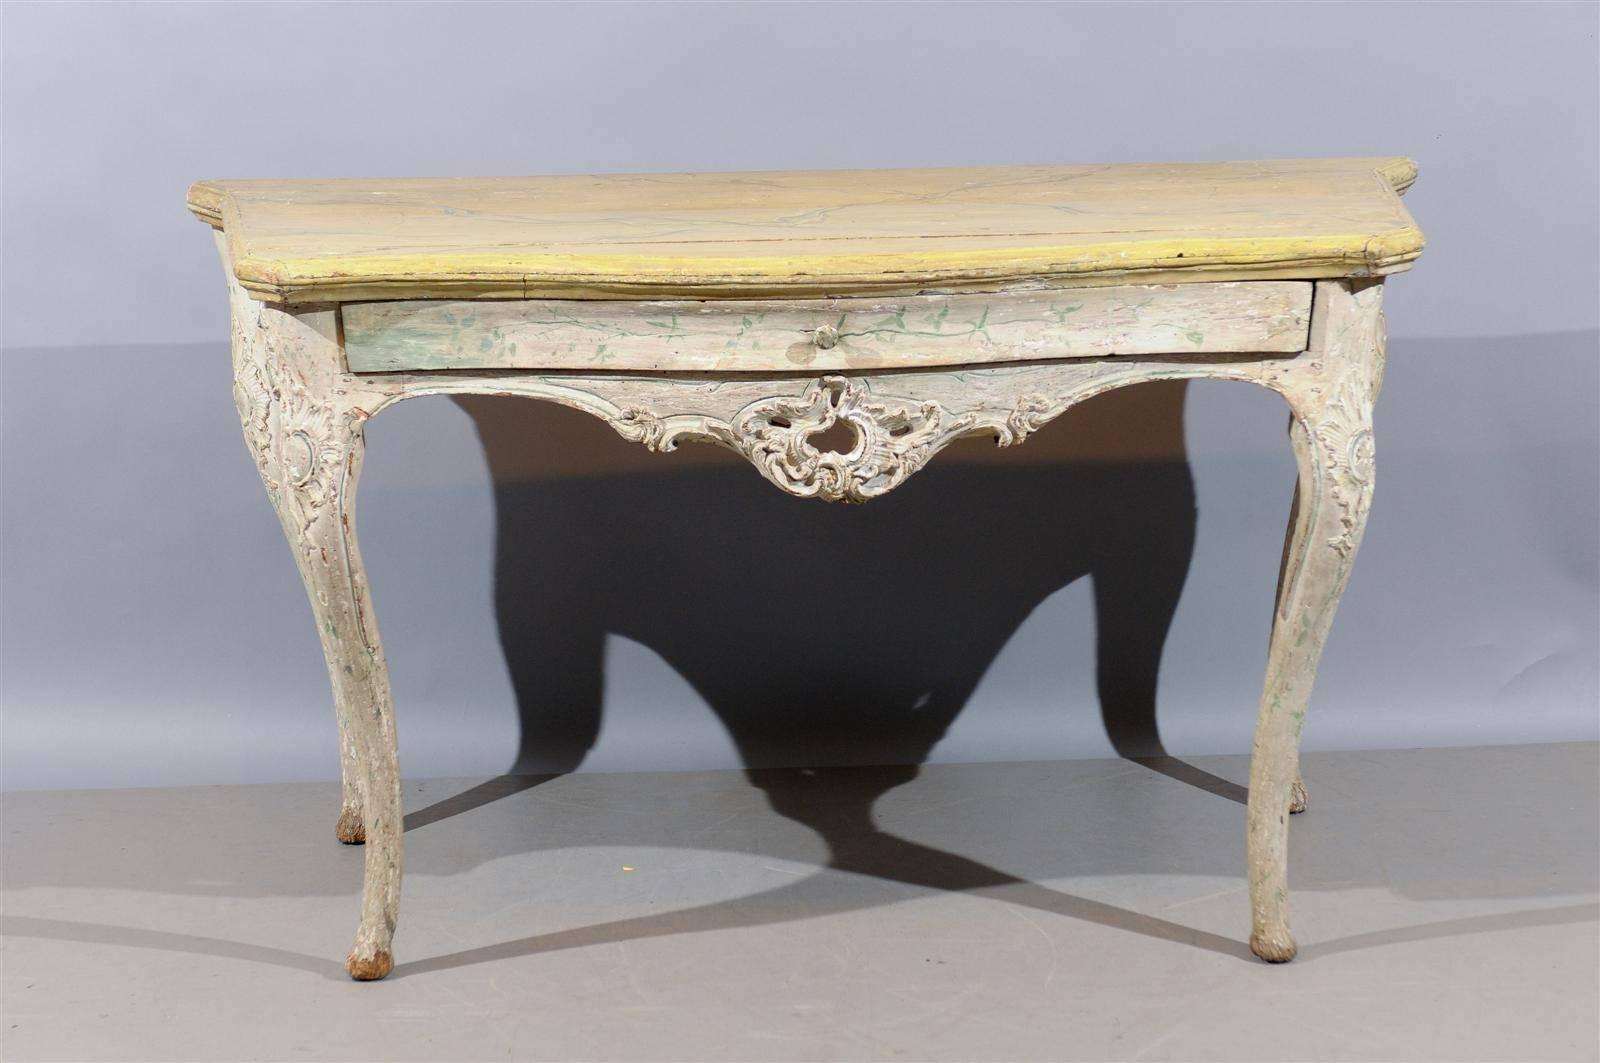 Large 18th century Italian Rococo painted console with serpentine shape and drawer.